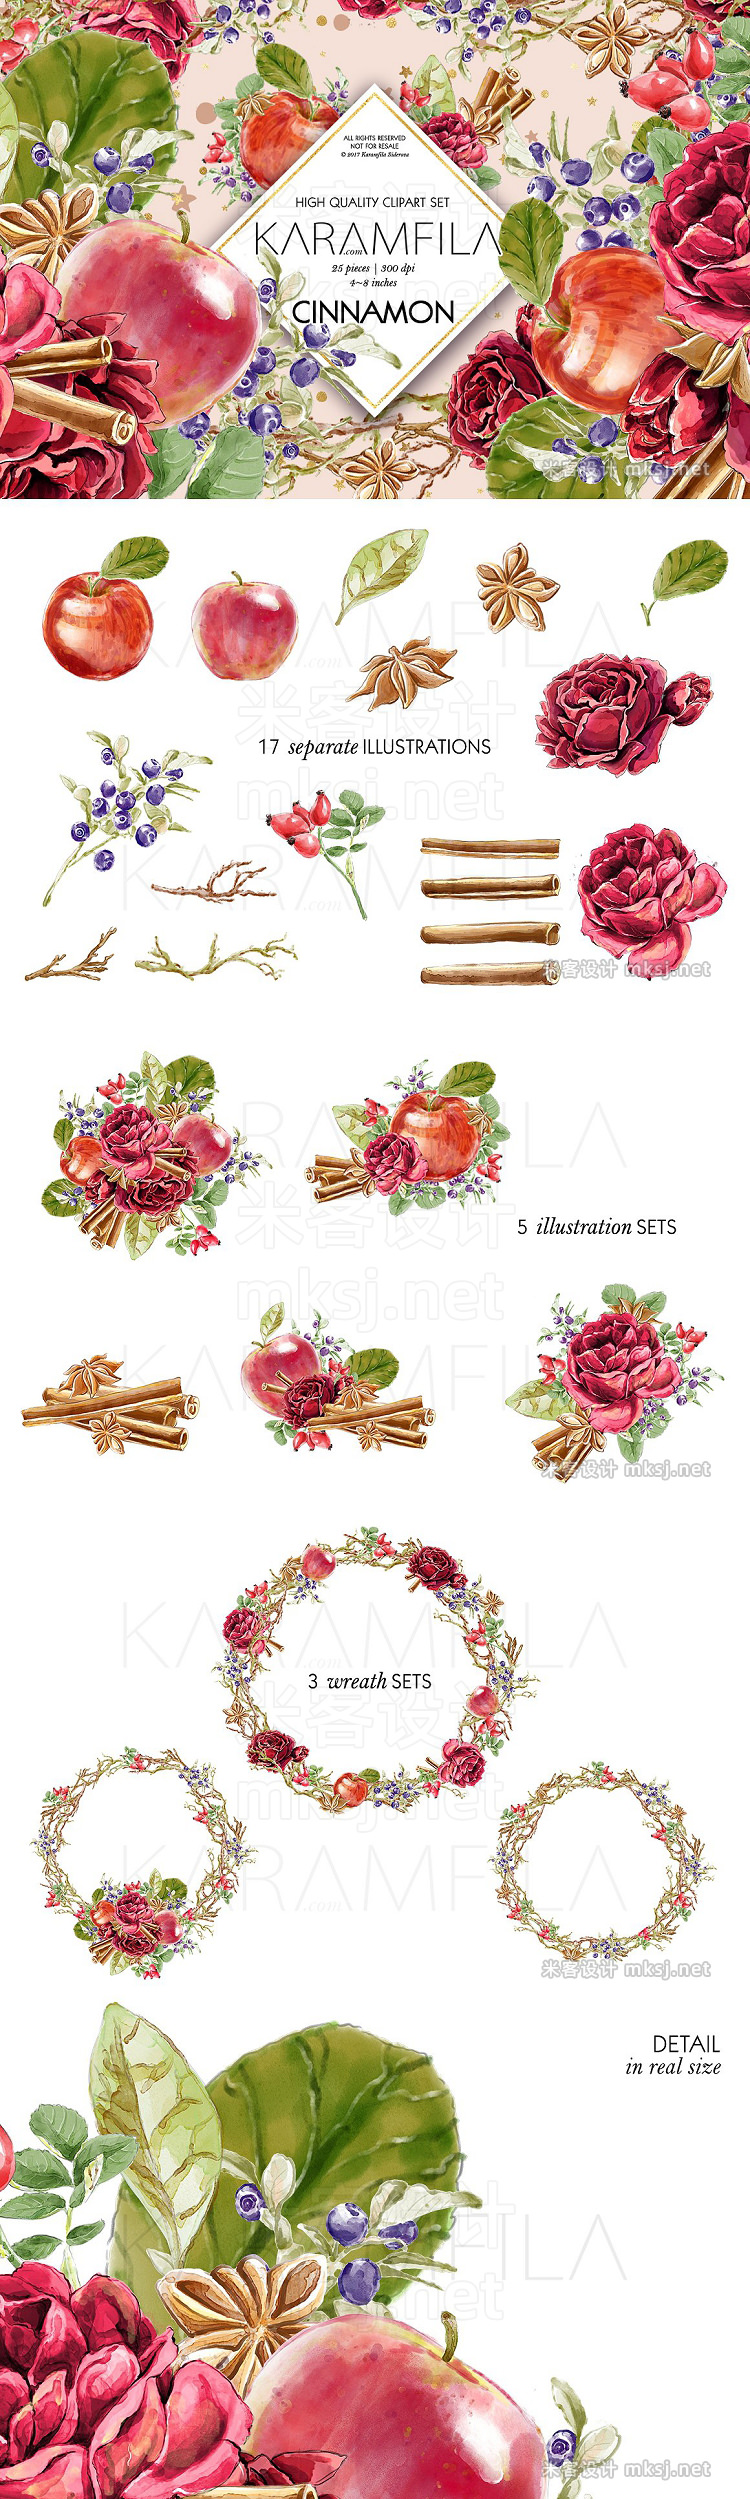 png素材 Cinnamon and Apples Clipart